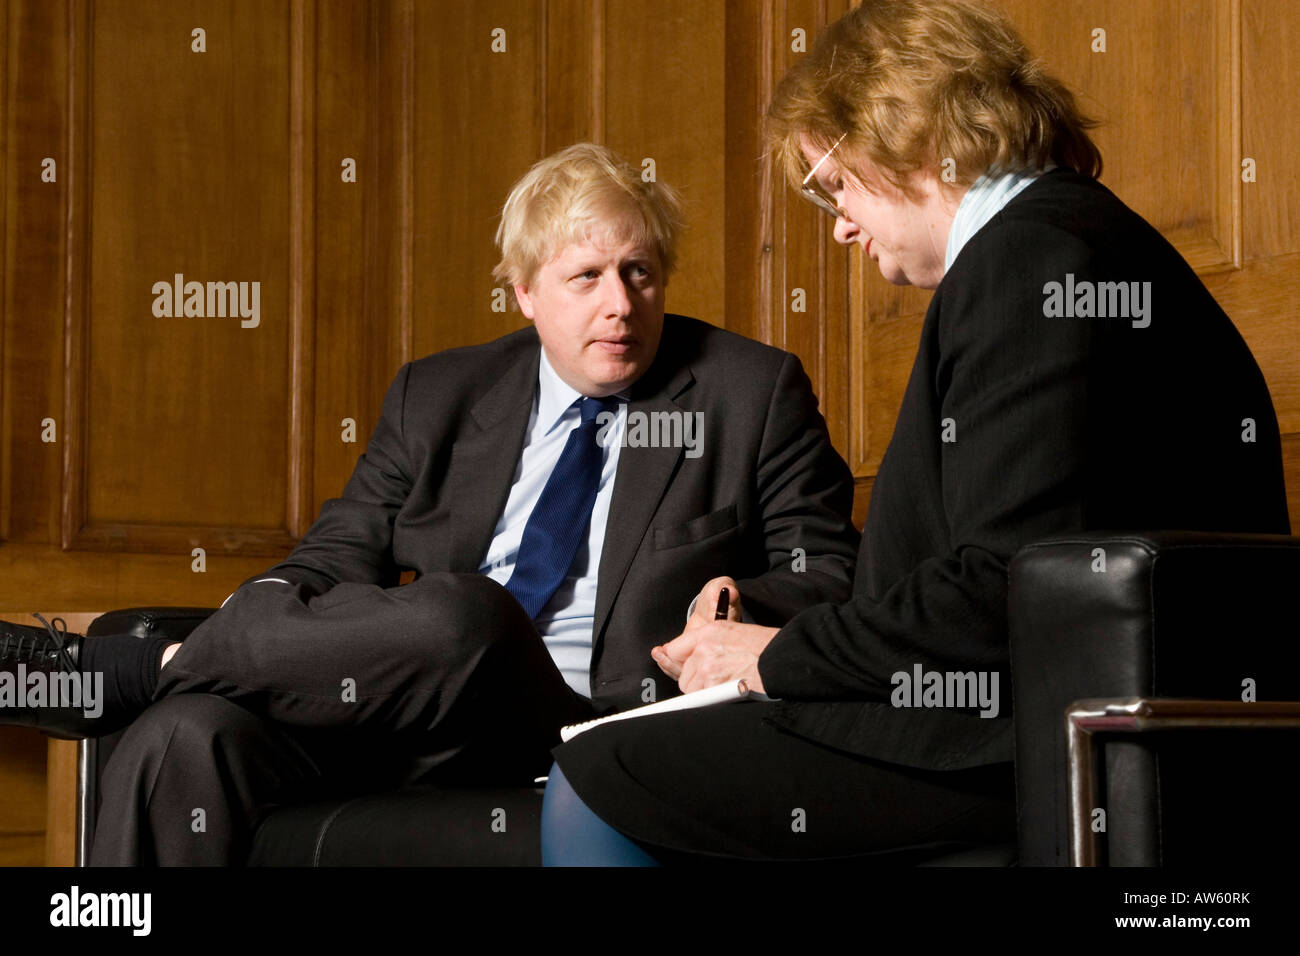 MP Boris Johnson being interviewed before the London Mayoral Election, County Hall, London, 27/02/08 Stock Photo